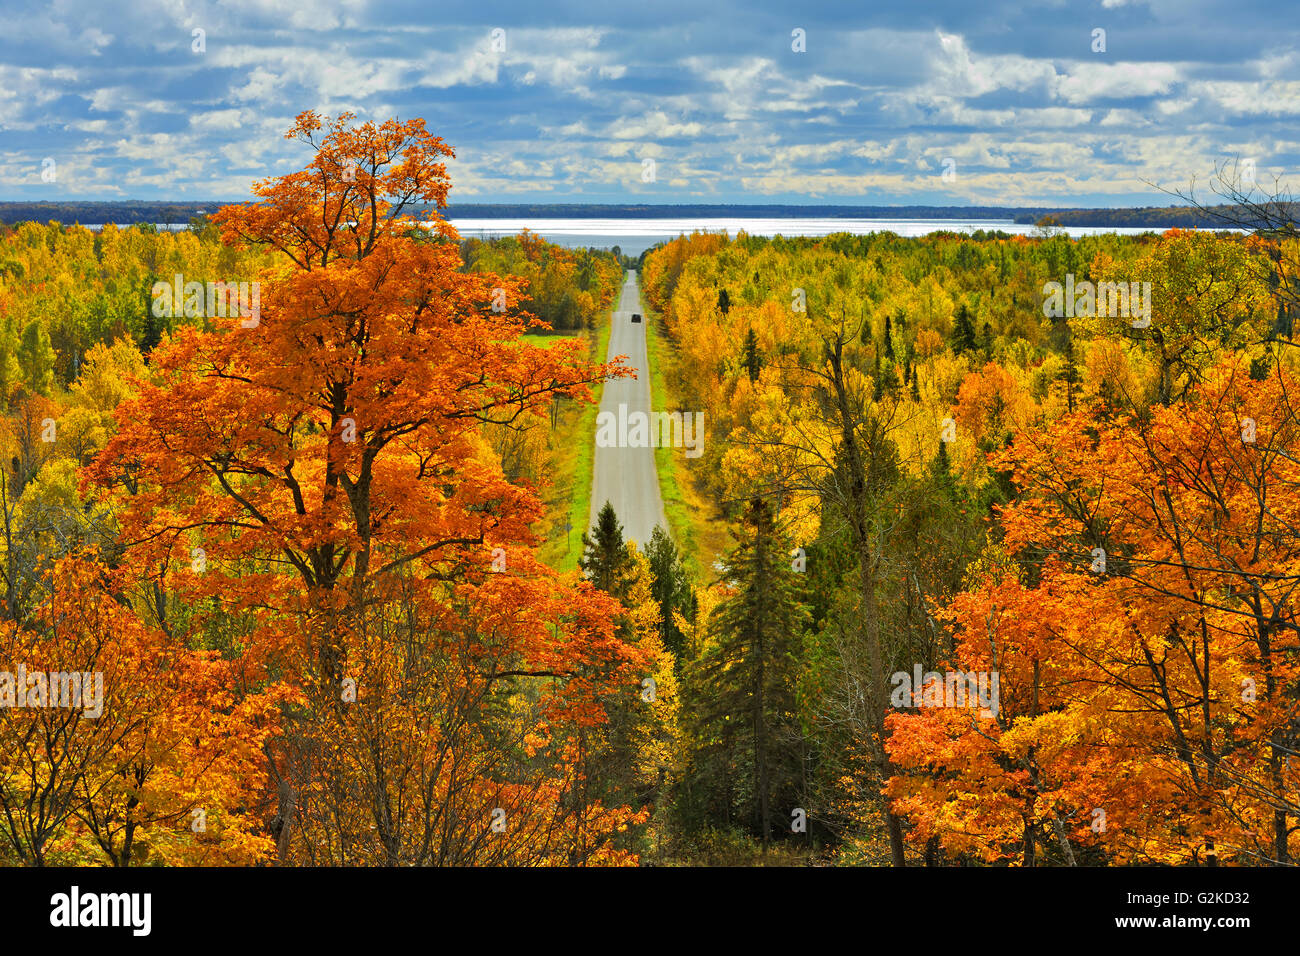 Country road in autumn color Manitoulin Island Ontario Canada Stock Photo